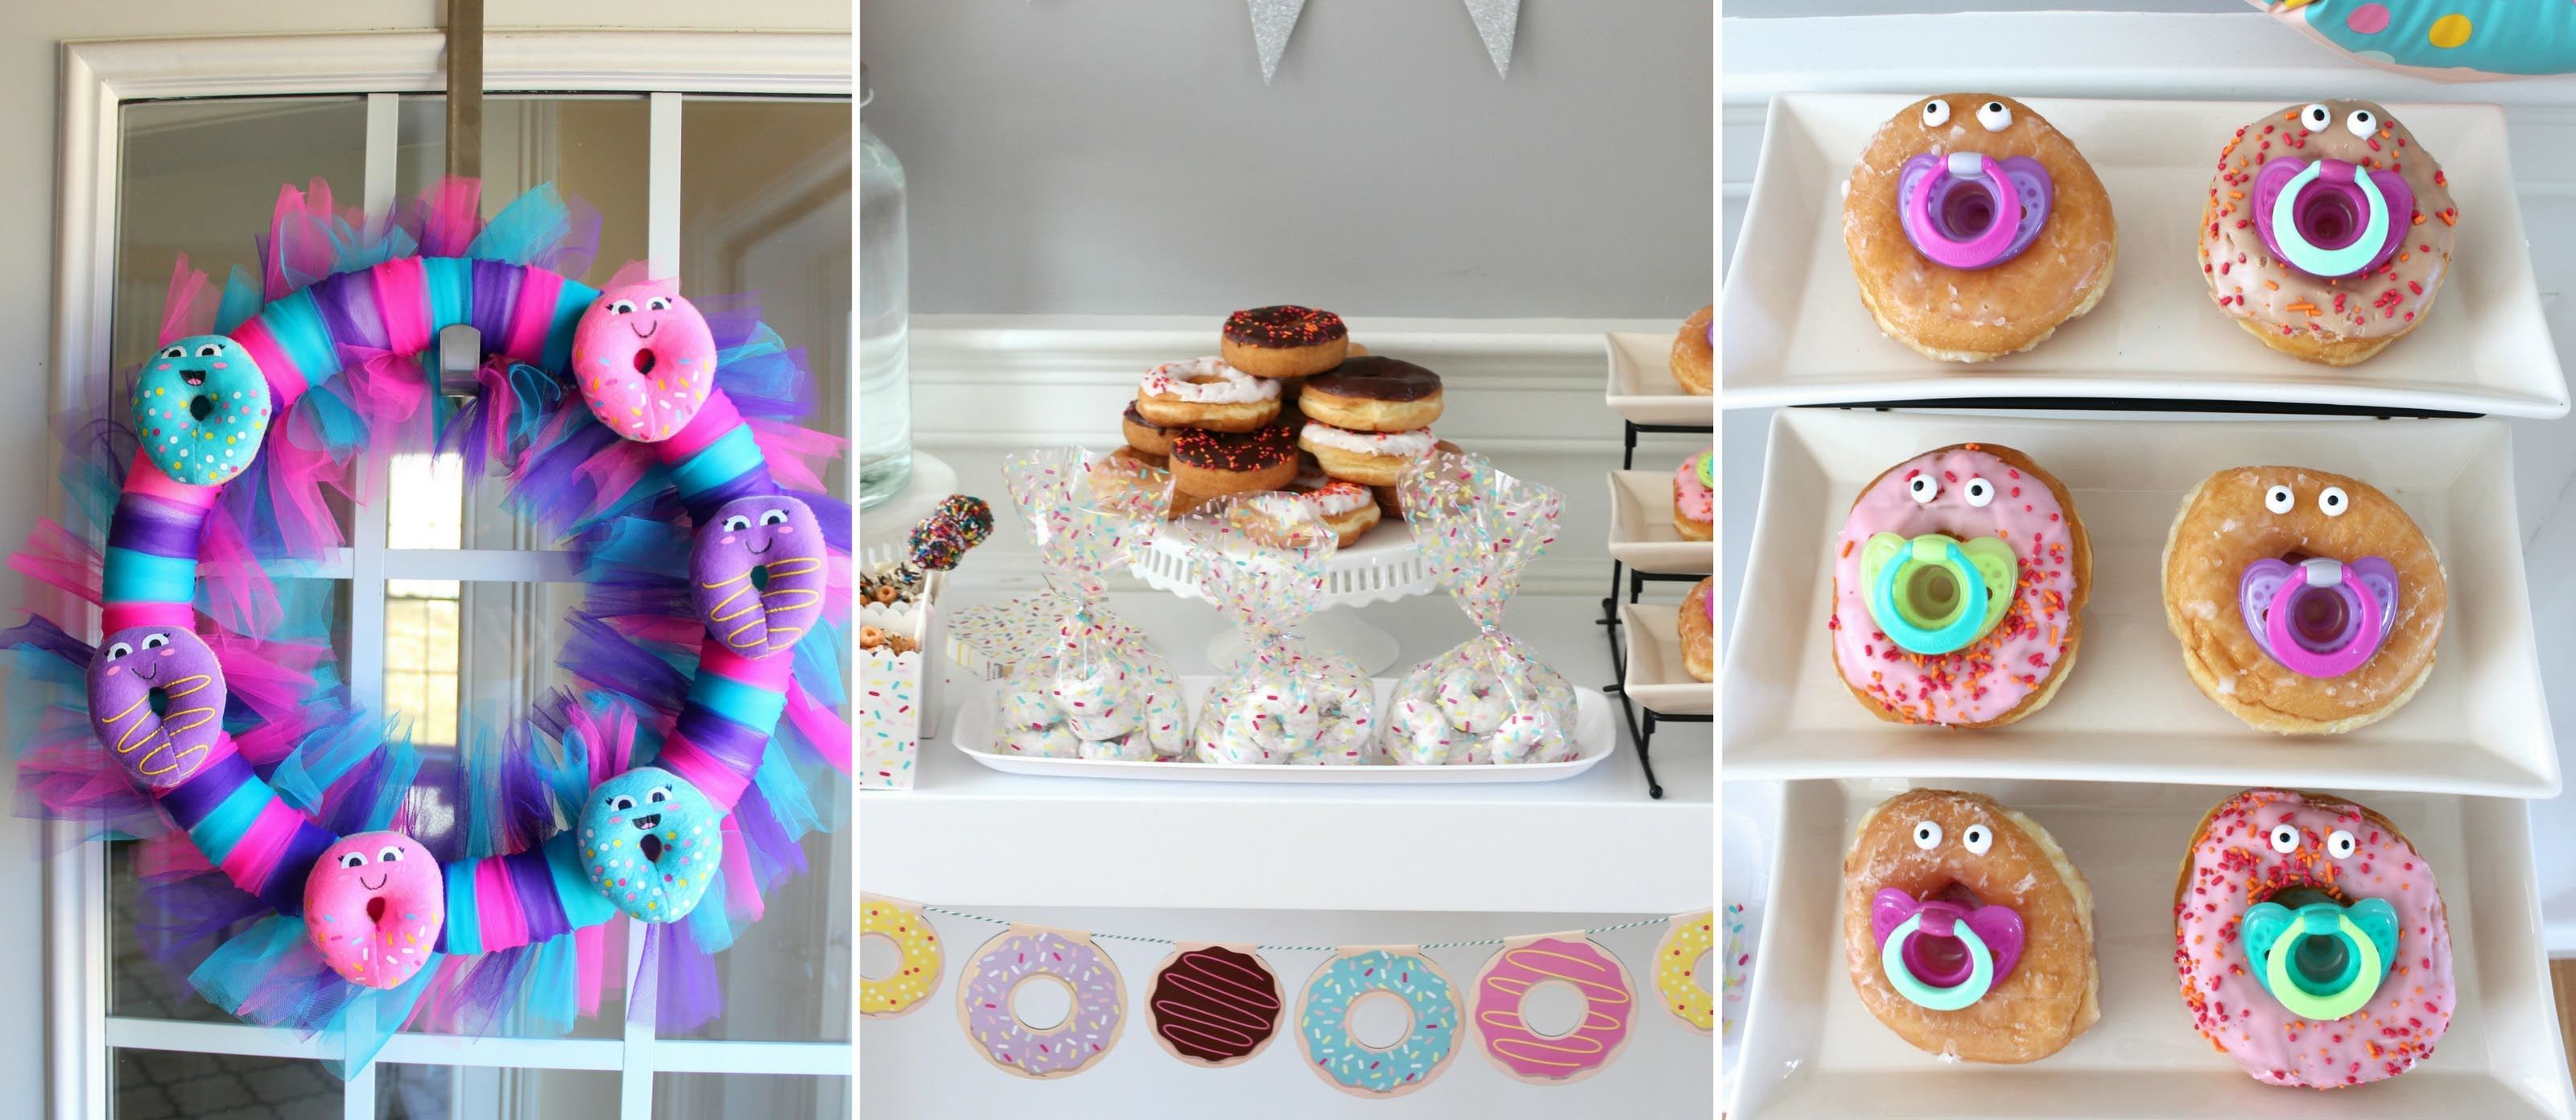 new years breakfast idea and free over at donut decorating ideas pumpkin year party